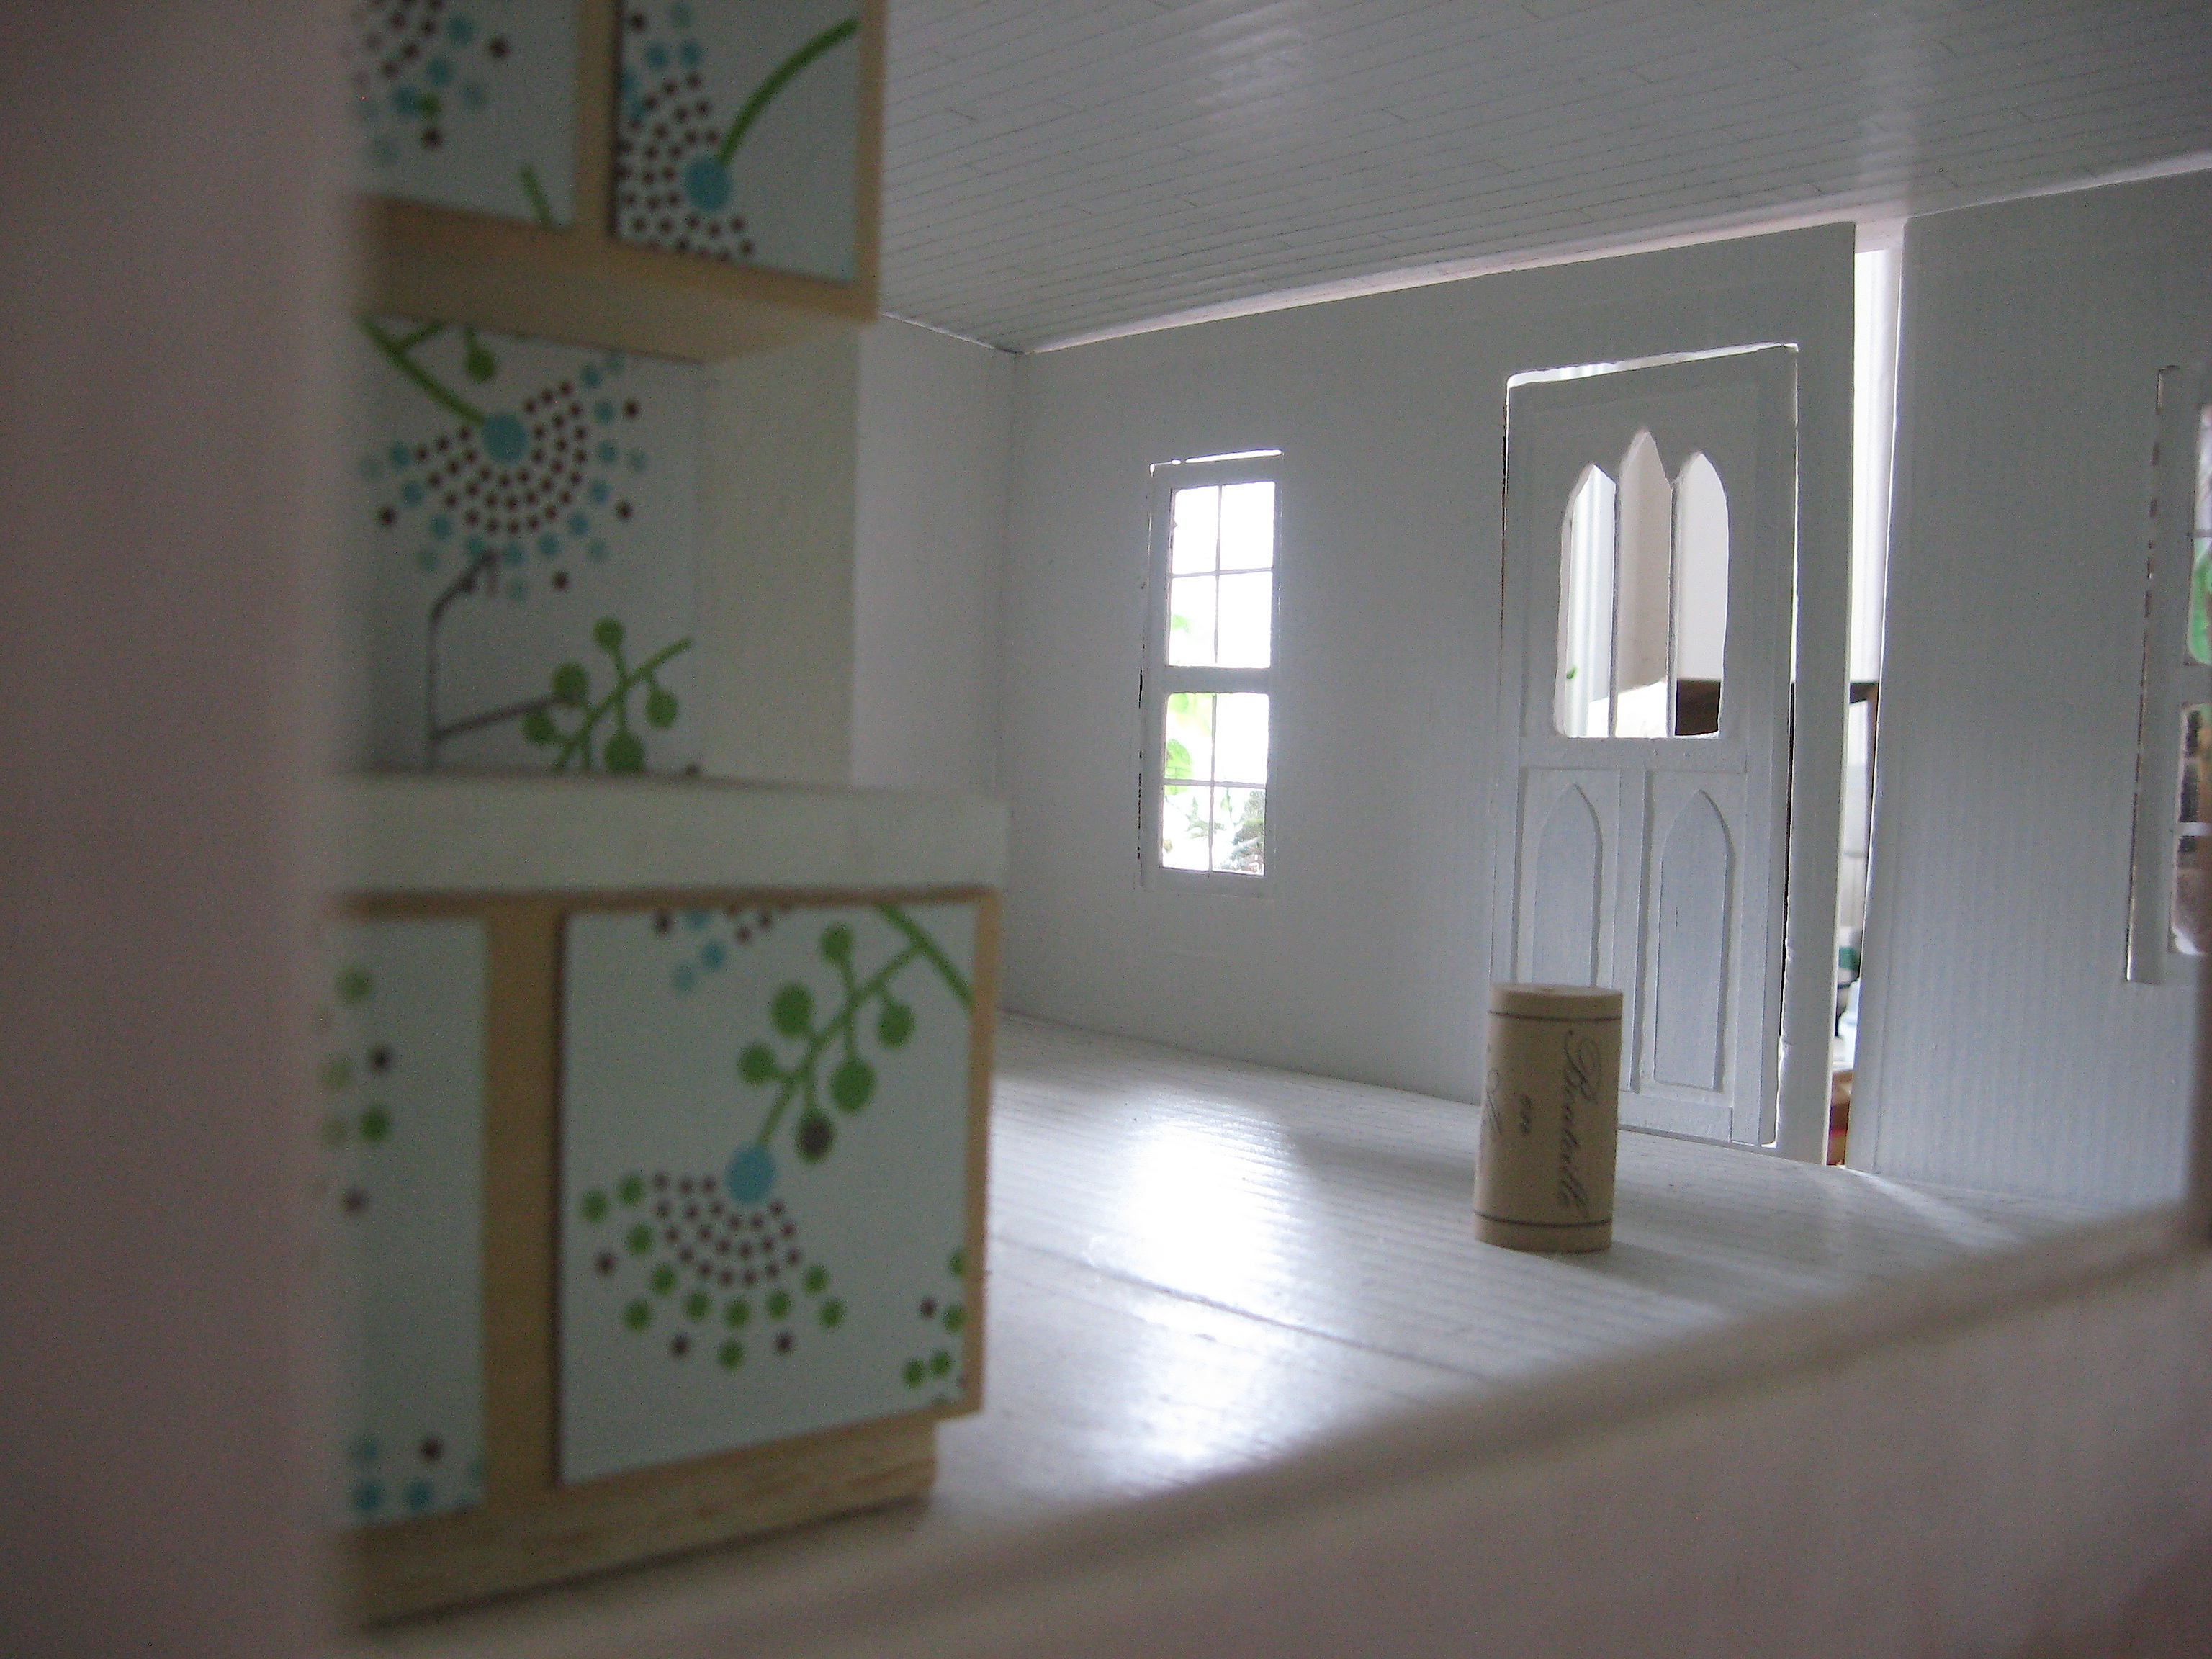 Unfinished interior with wine cork.